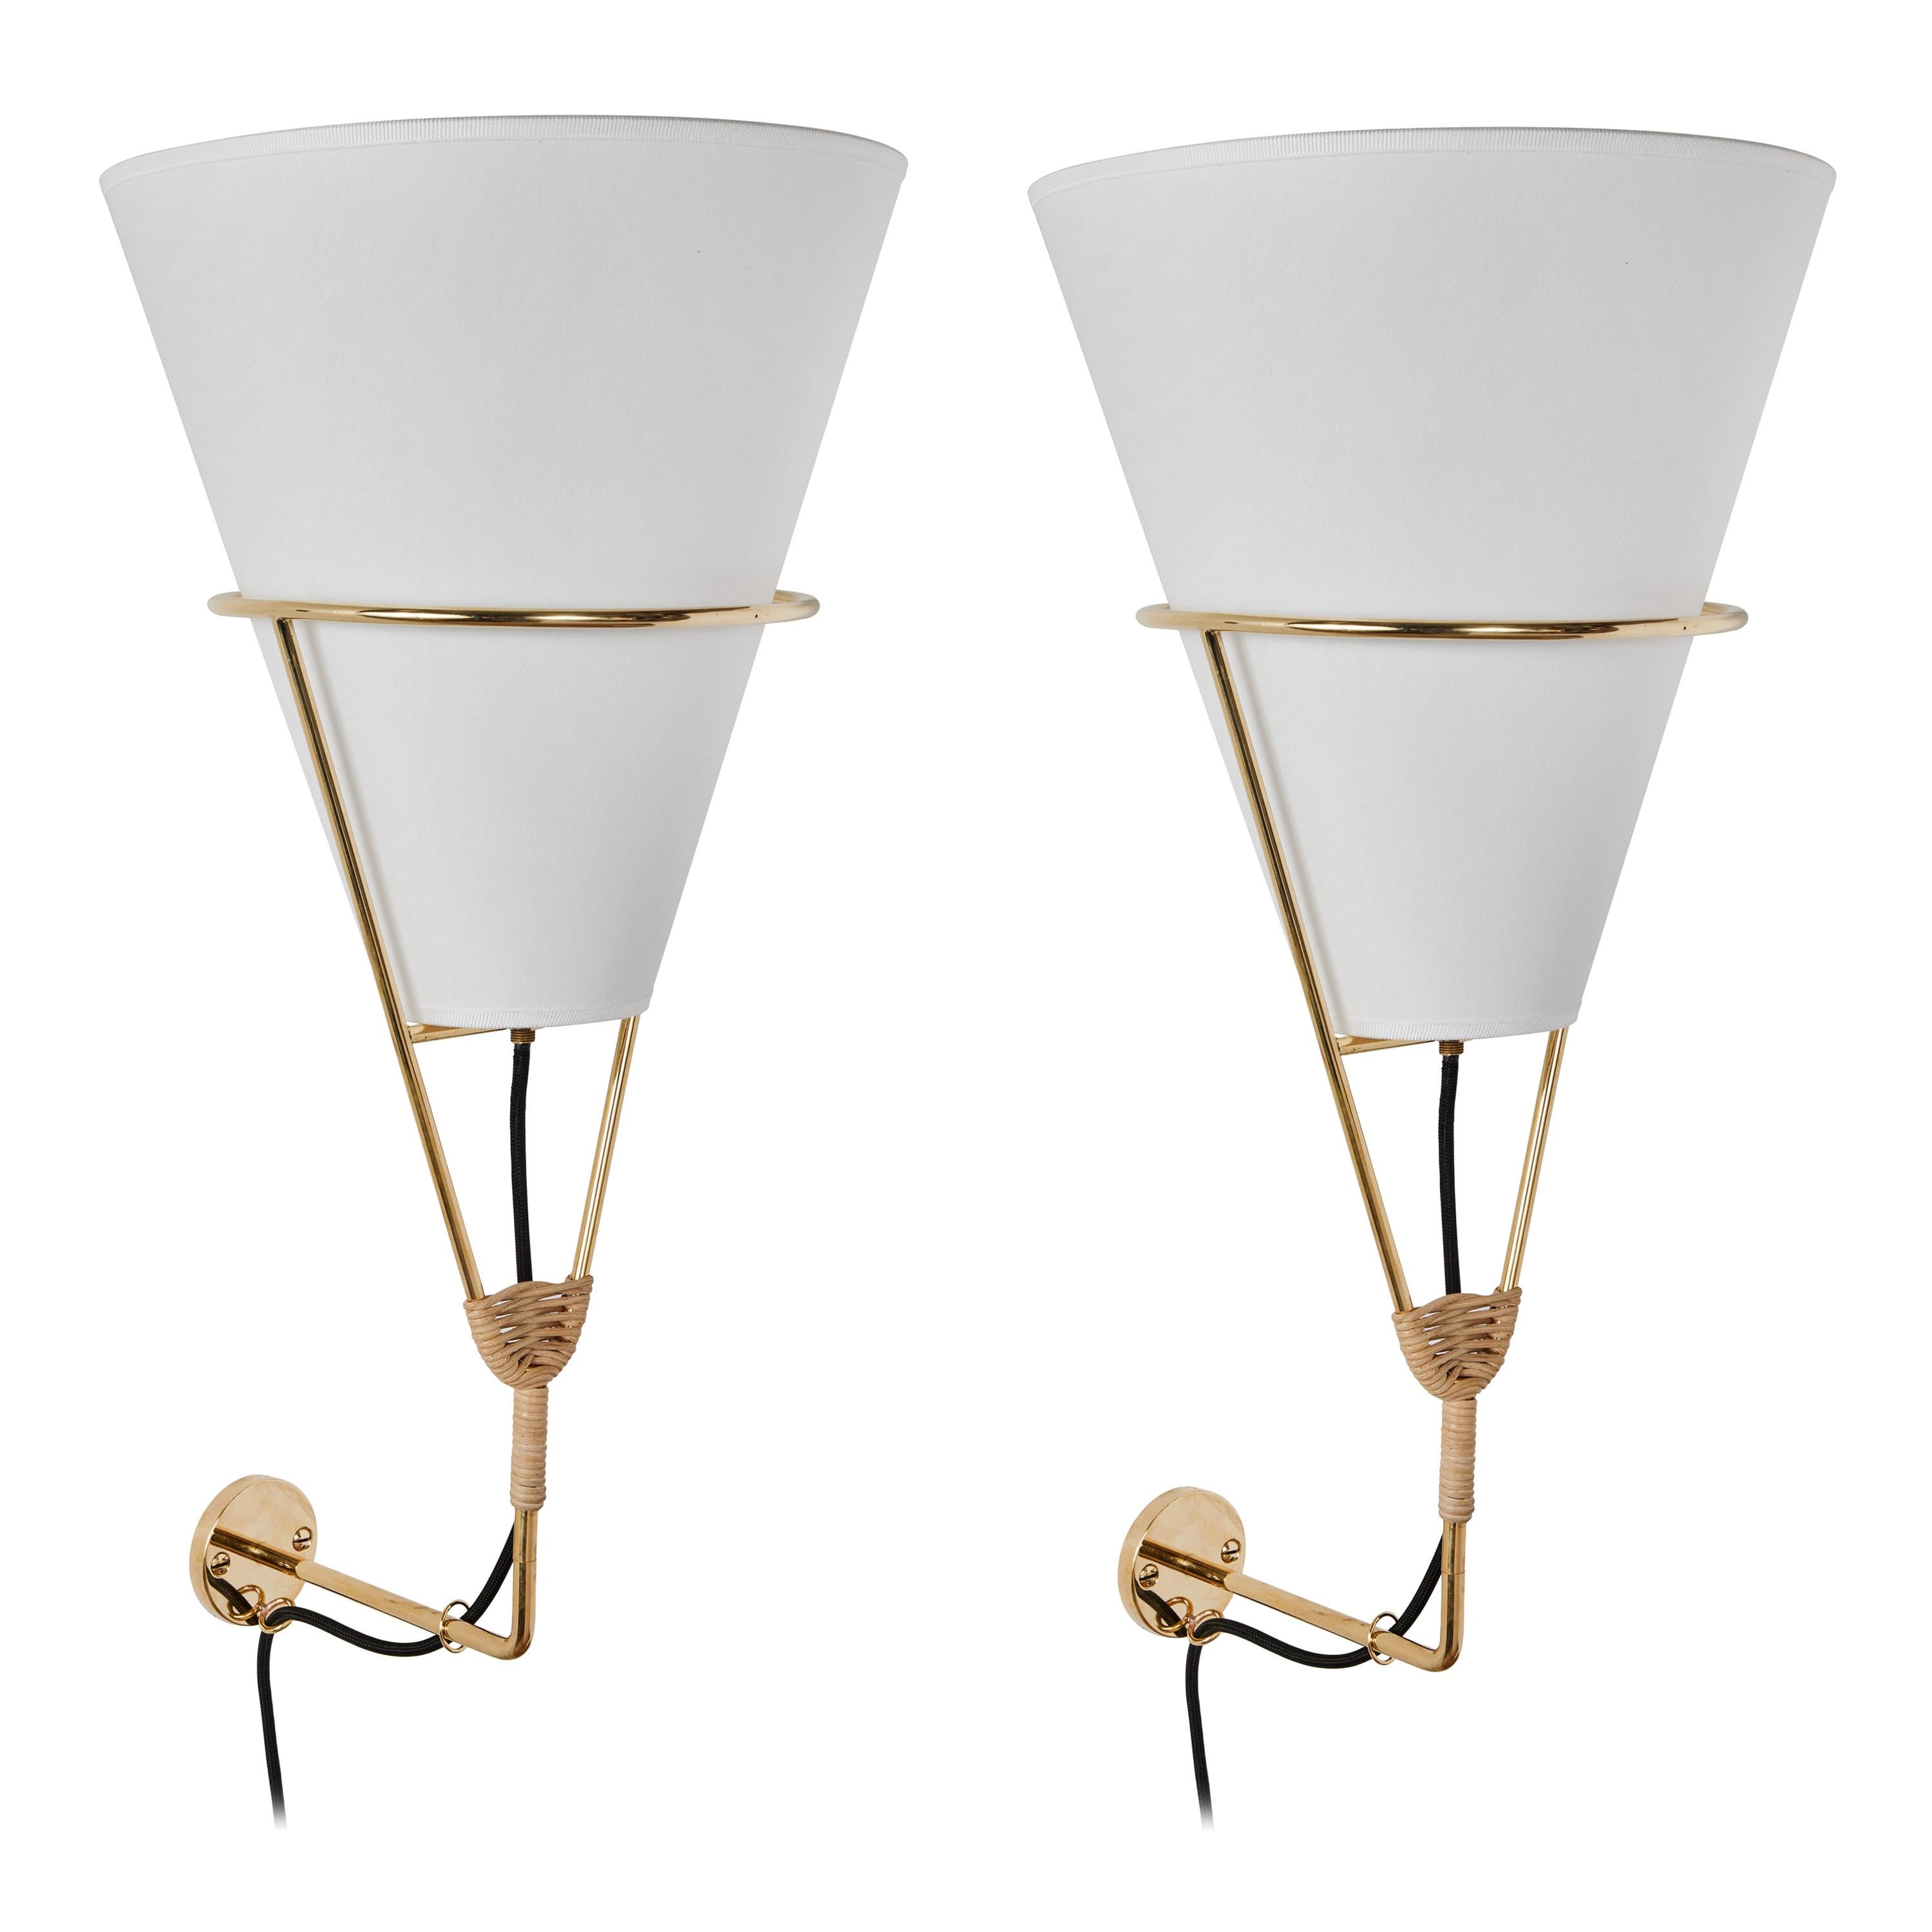 Large Carl Auböck 'Vice Versa' Wall Lamp For Sale at 1stDibs | aubo lamp